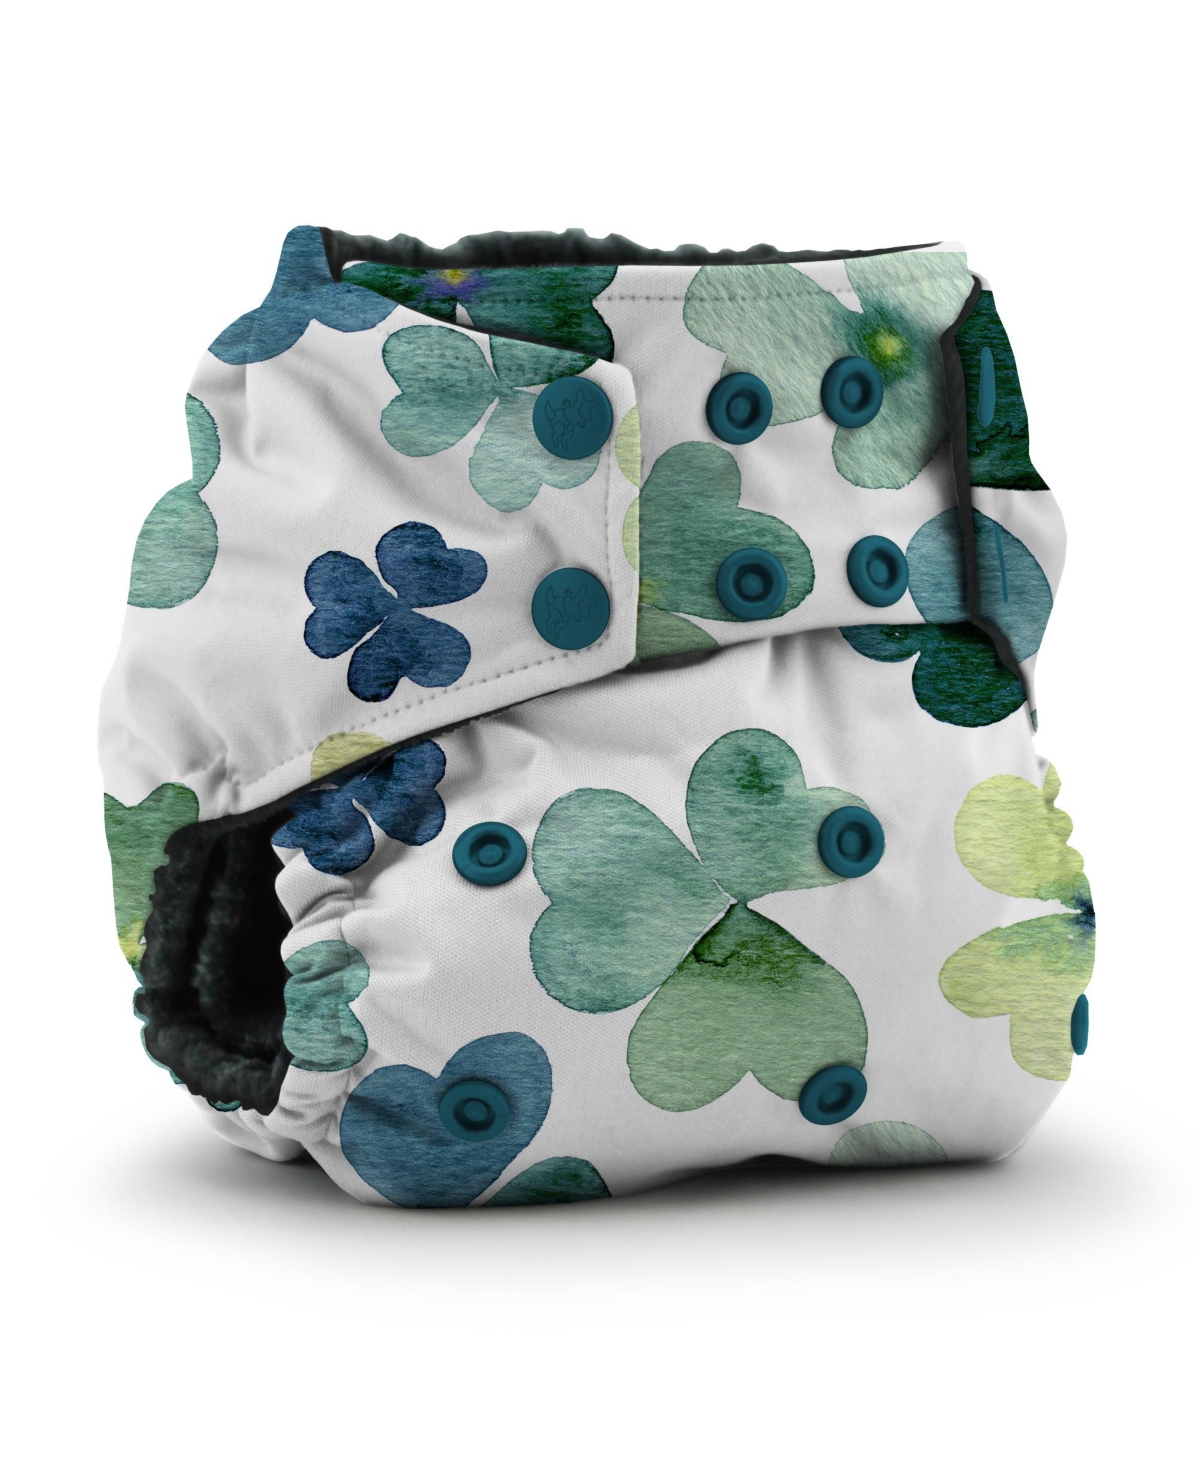 Kanga Care Rumparooz Obv (organic Rayon From Bamboo Velour) One Size Pocket Cloth Diaper In Clover